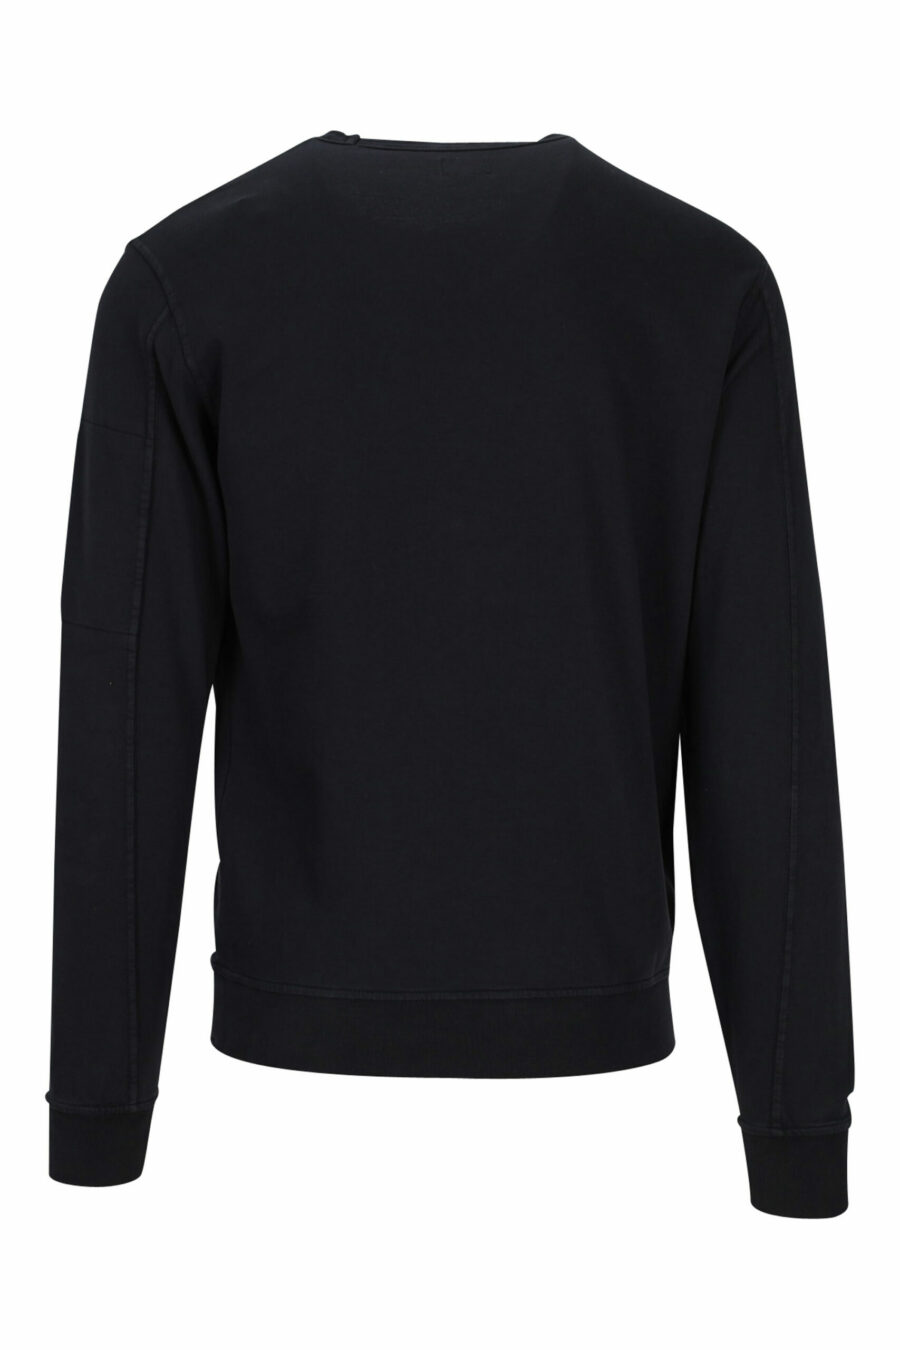 Black sweatshirt with side lens minilogue - 7620943592191 2 scaled